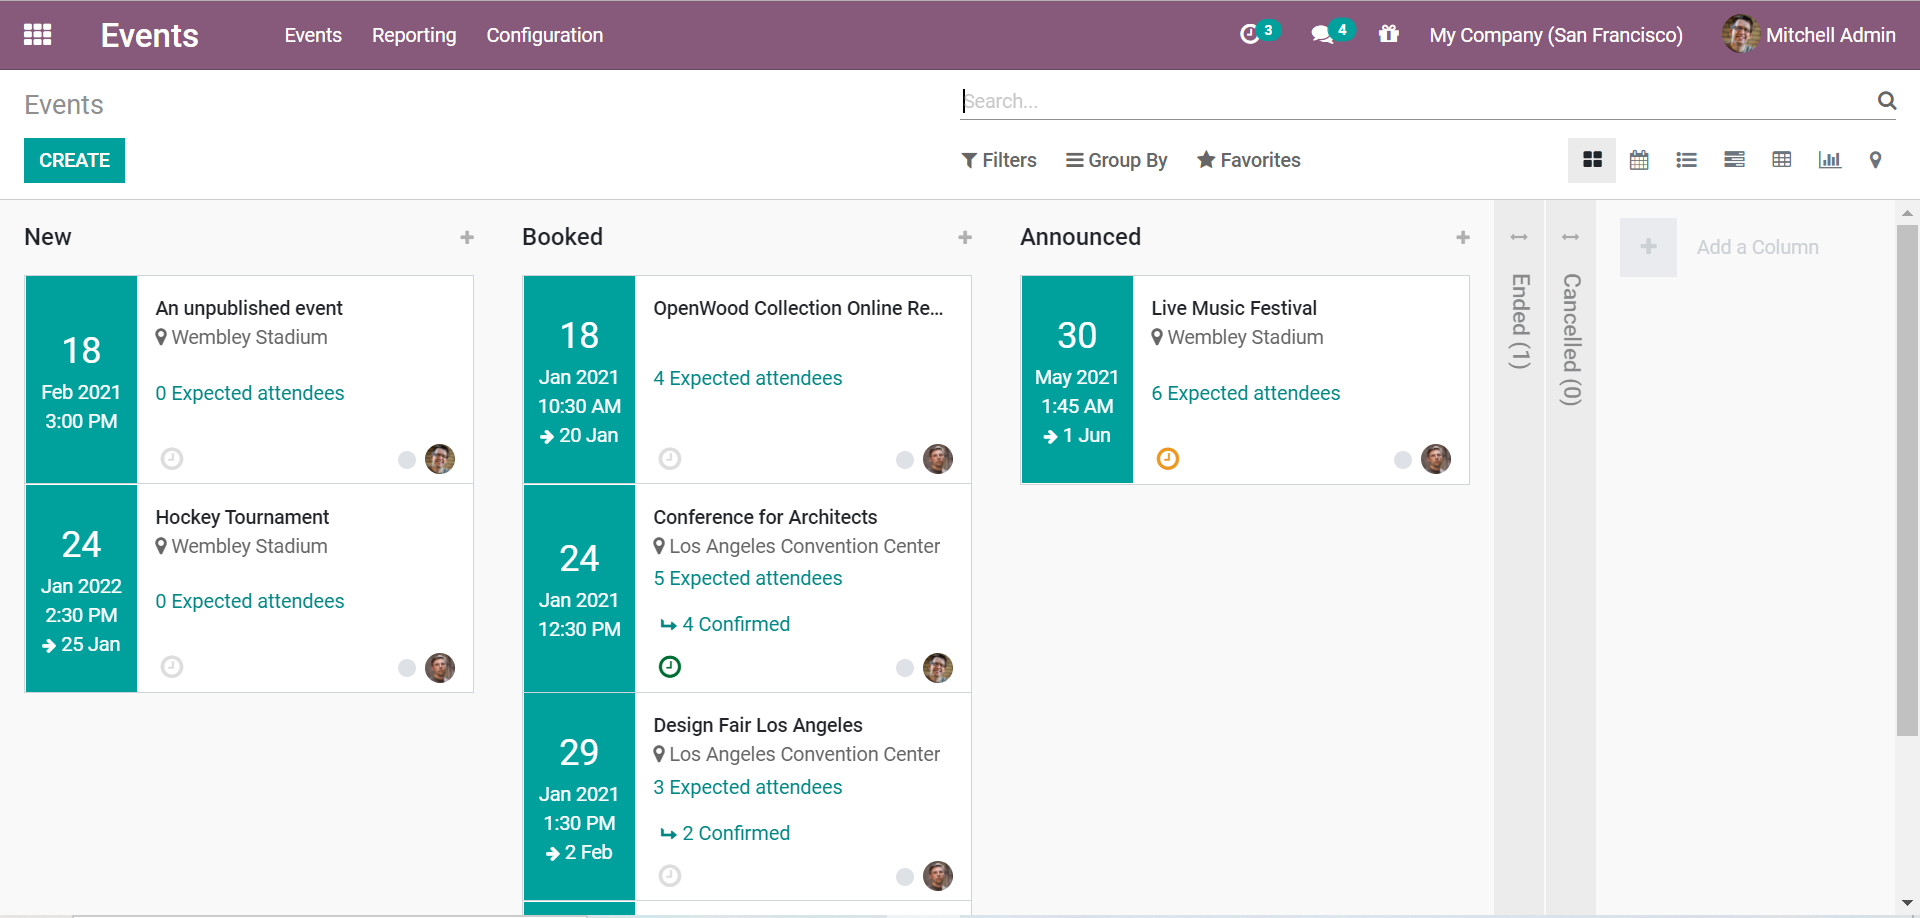 how-to-manage-events-with-odoo-1